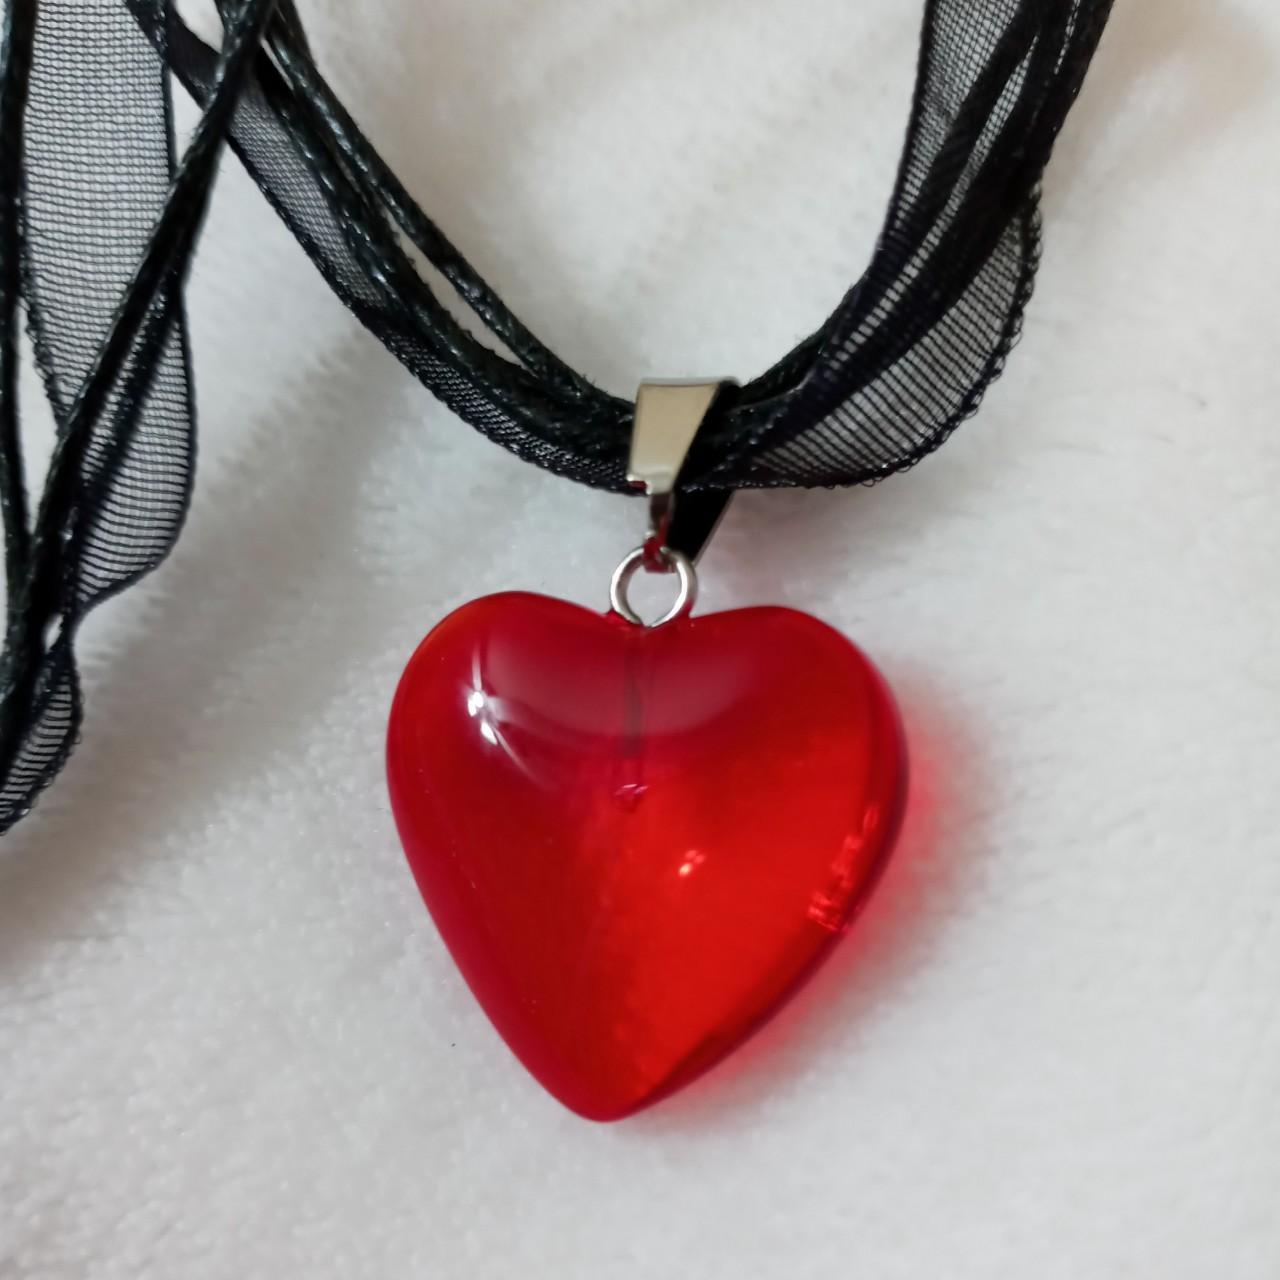 Small red glass heart ribbon necklace pendant Heart... - Depop